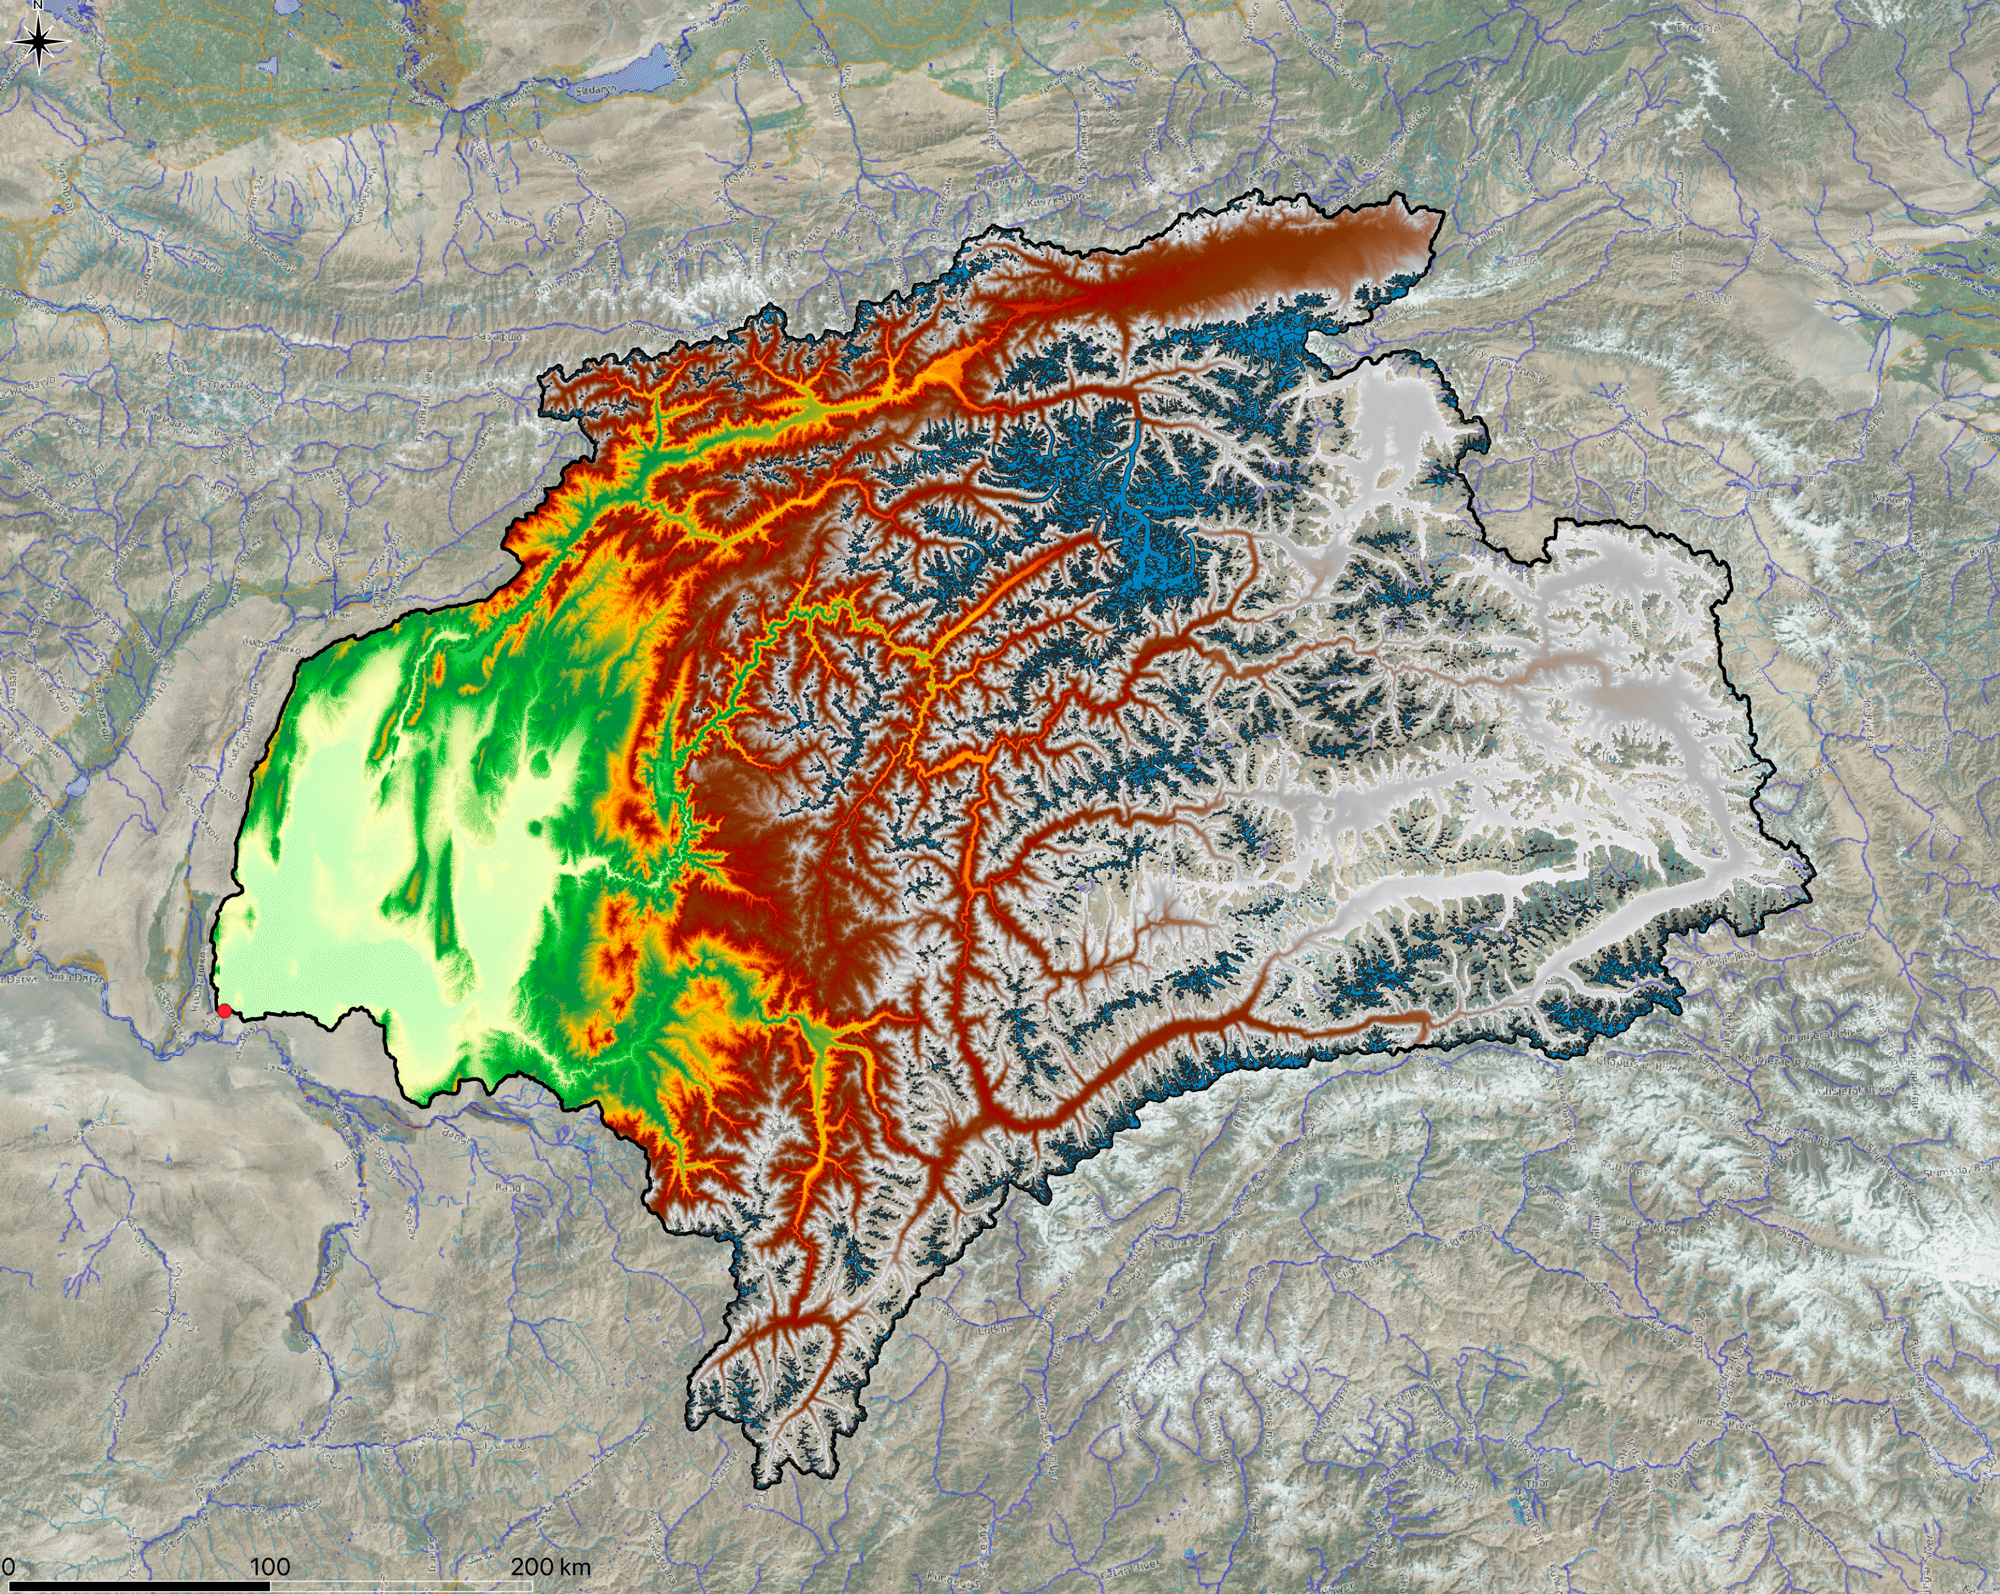 Visualization of the GLIMS data glaciation in the Vaksh-Pyandzh basin. The light blue shaded polygons show land ice on top of the underlying digital elevation model.